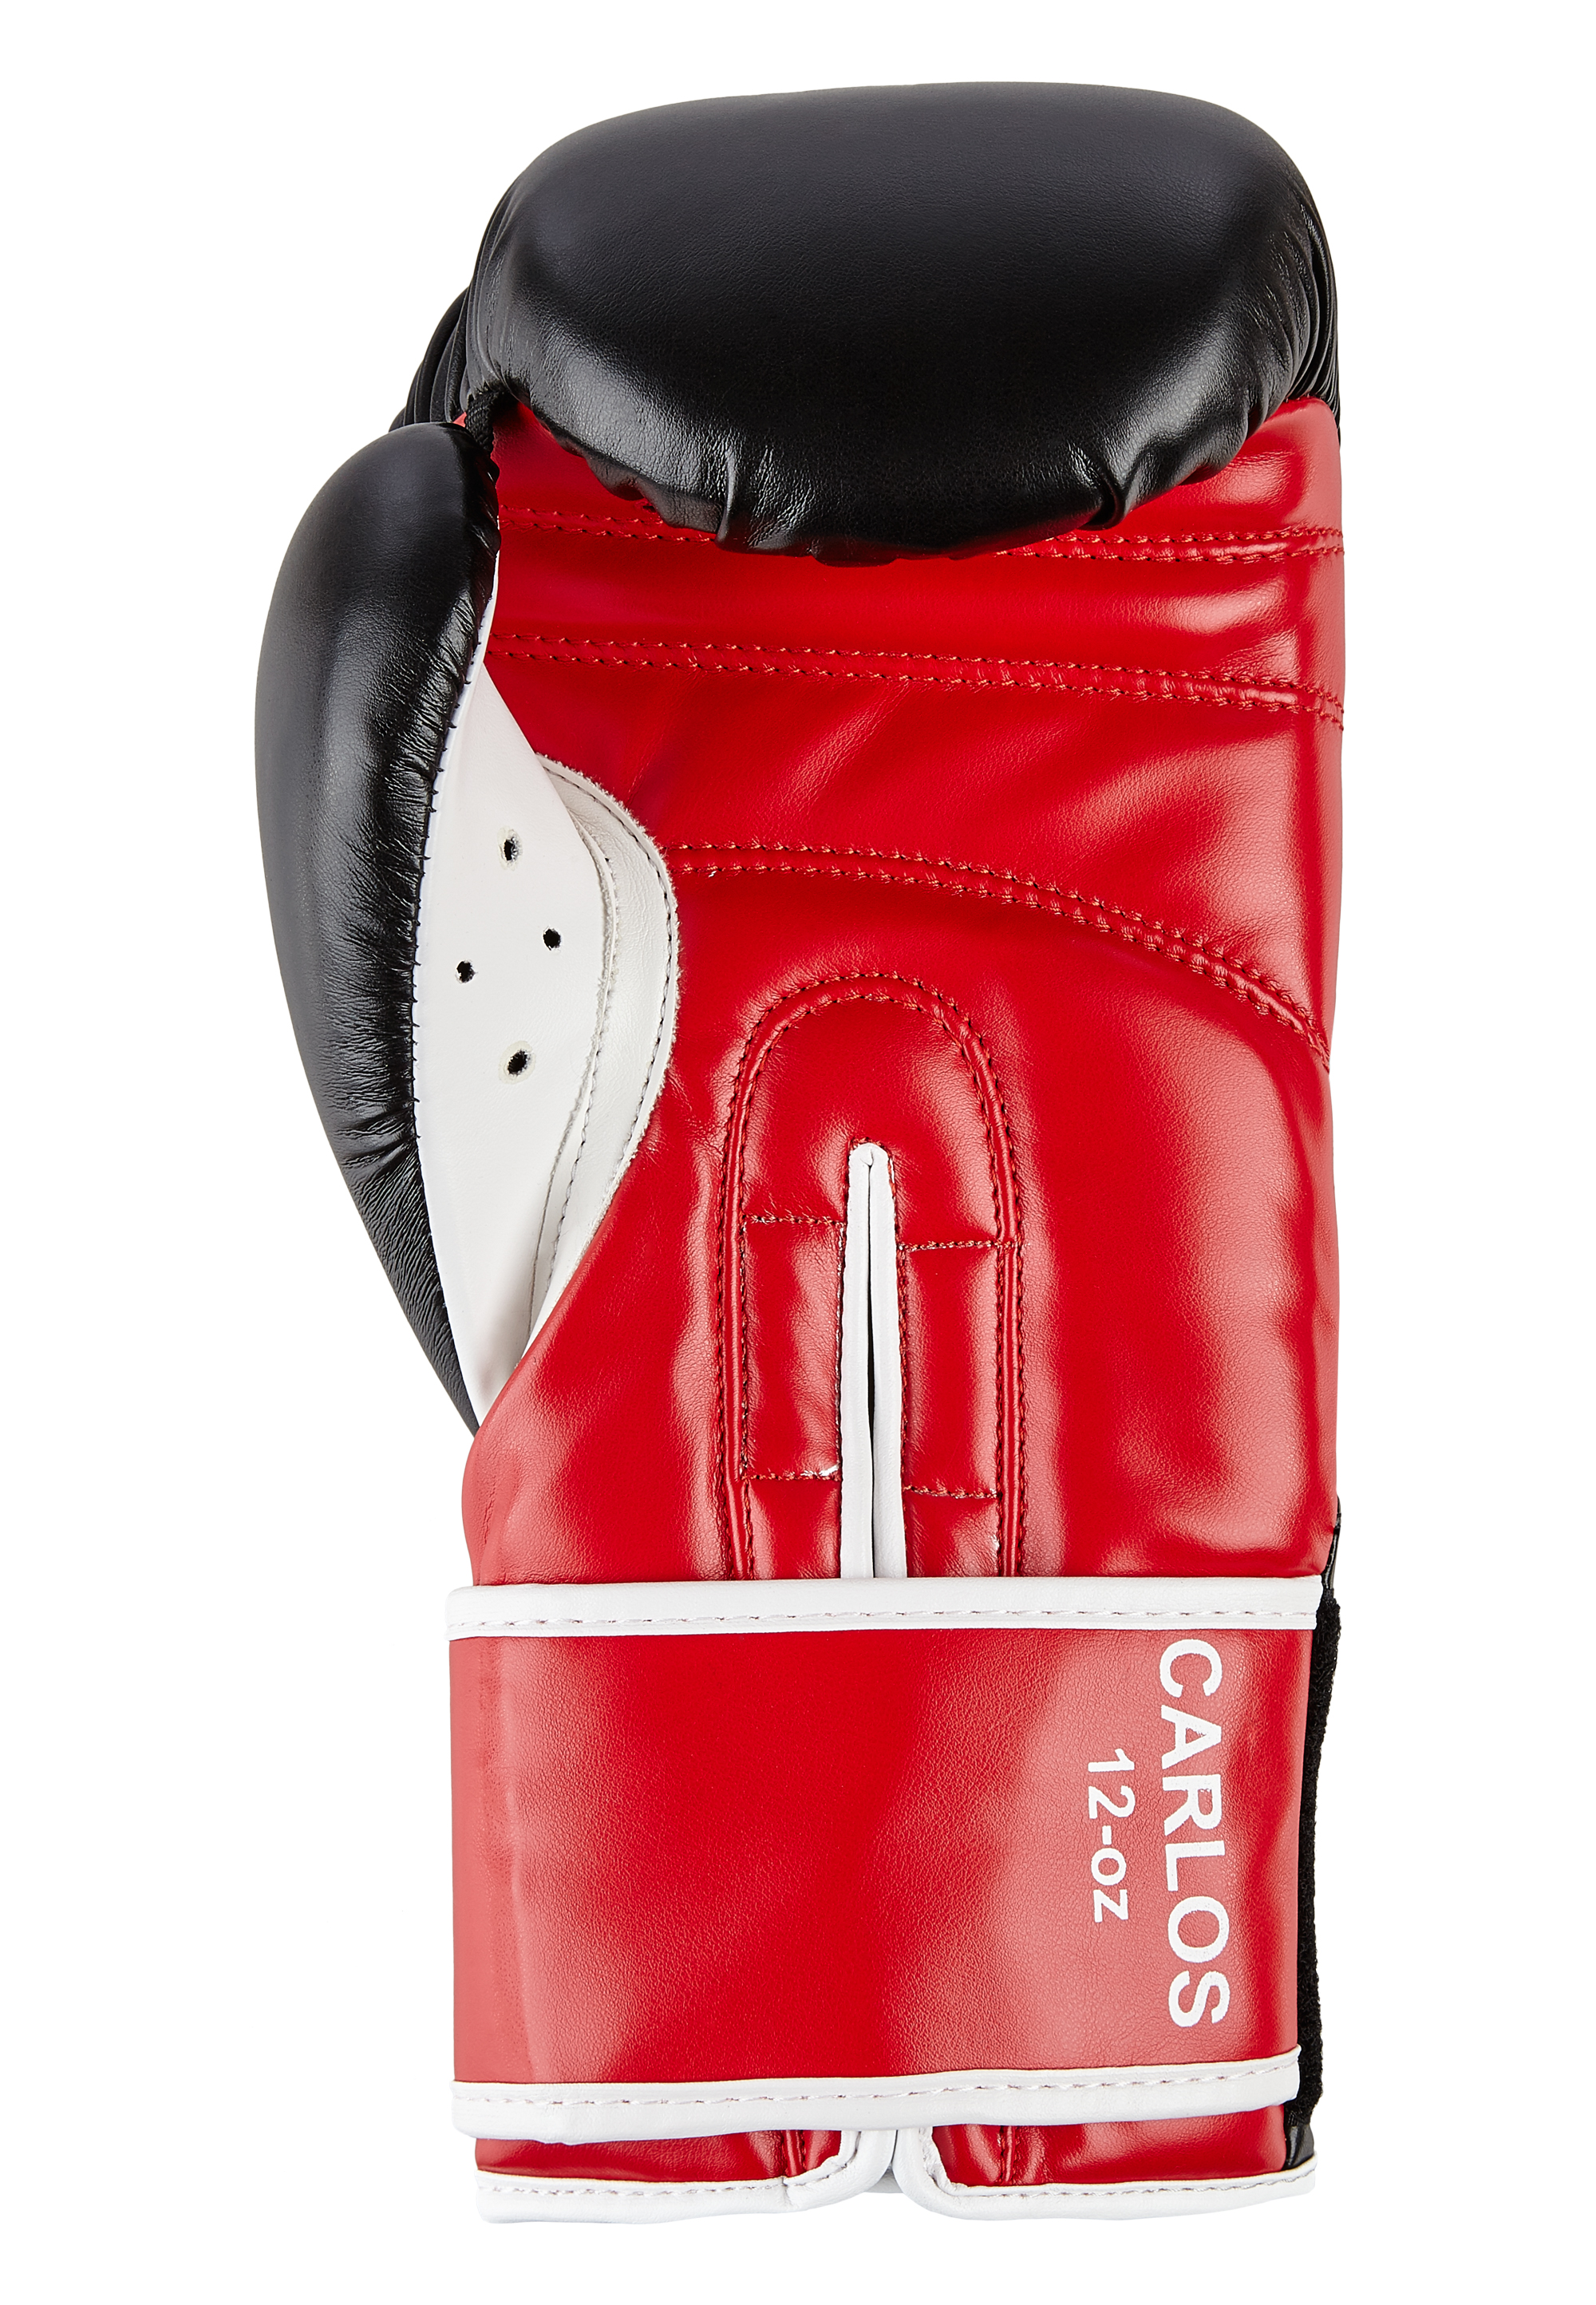 Lonsdale Artificial leather boxing gloves (1pair)